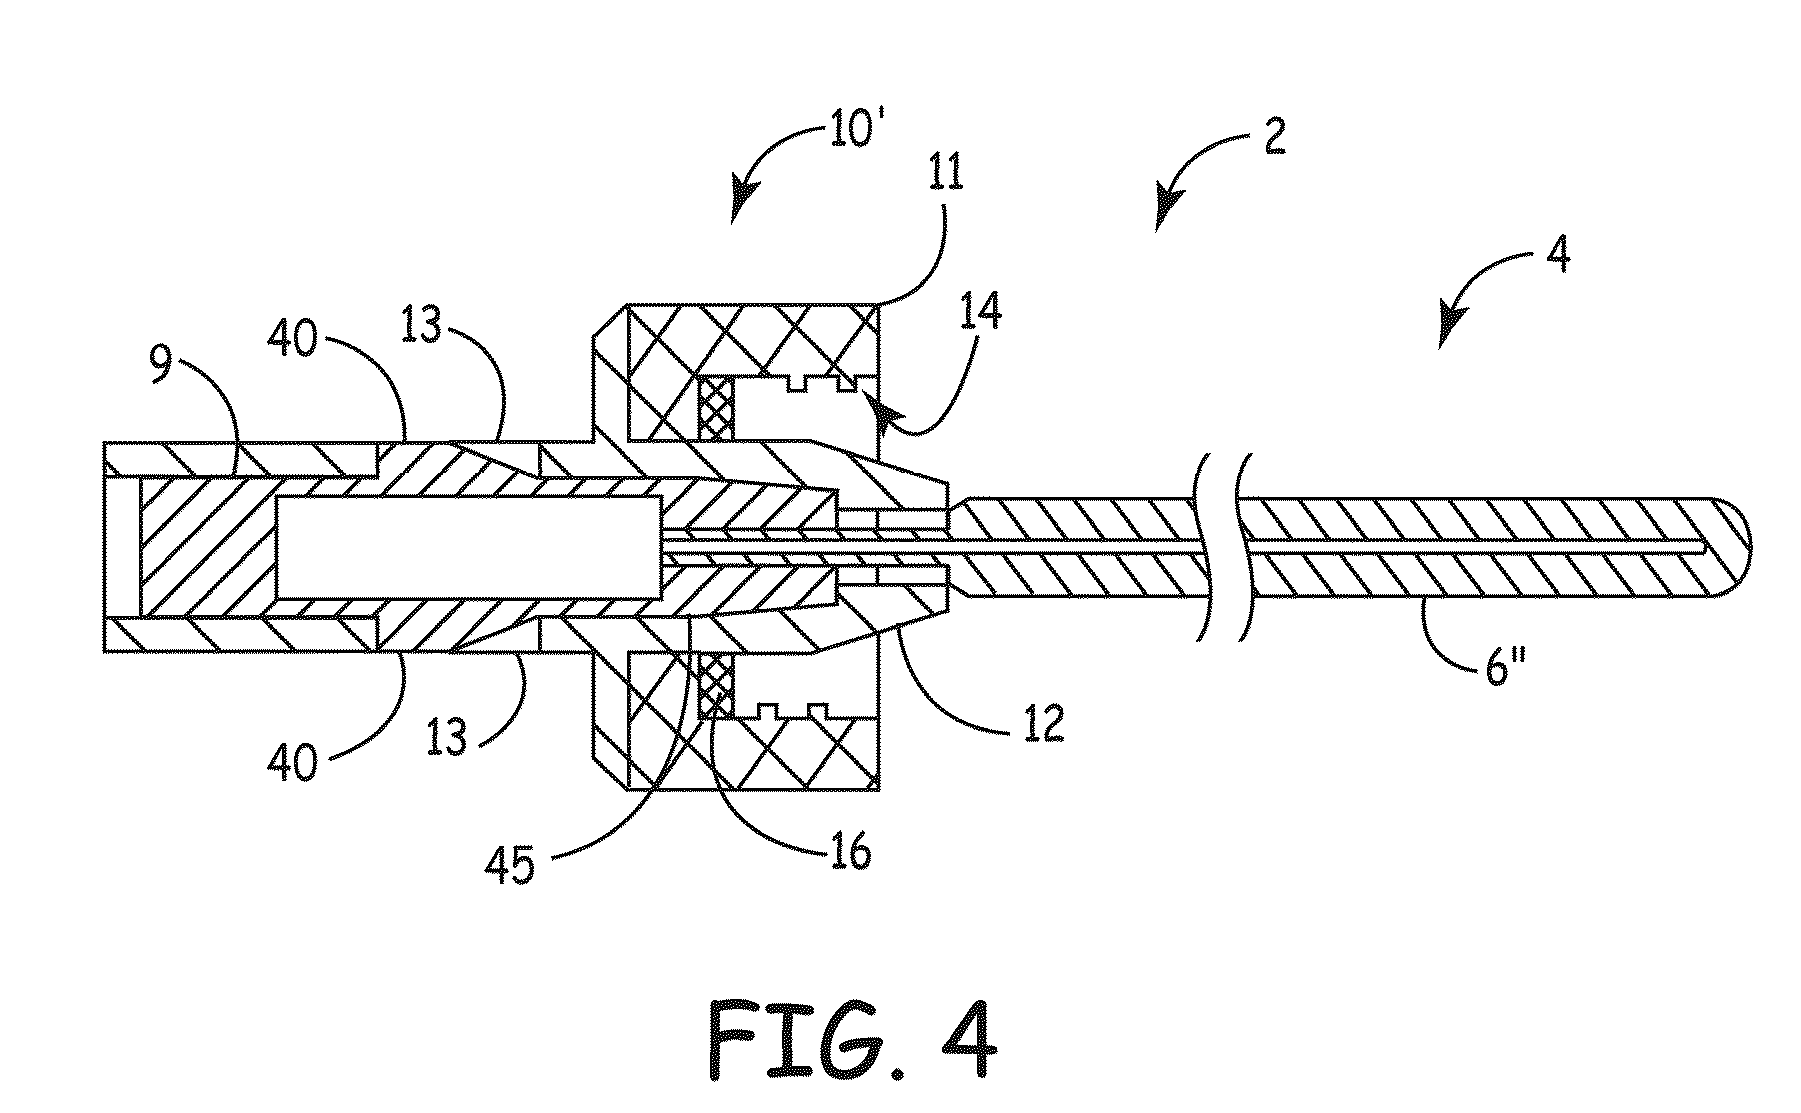 Apparatus for delivery of device and antimicrobial agent into trans-dermal catheter